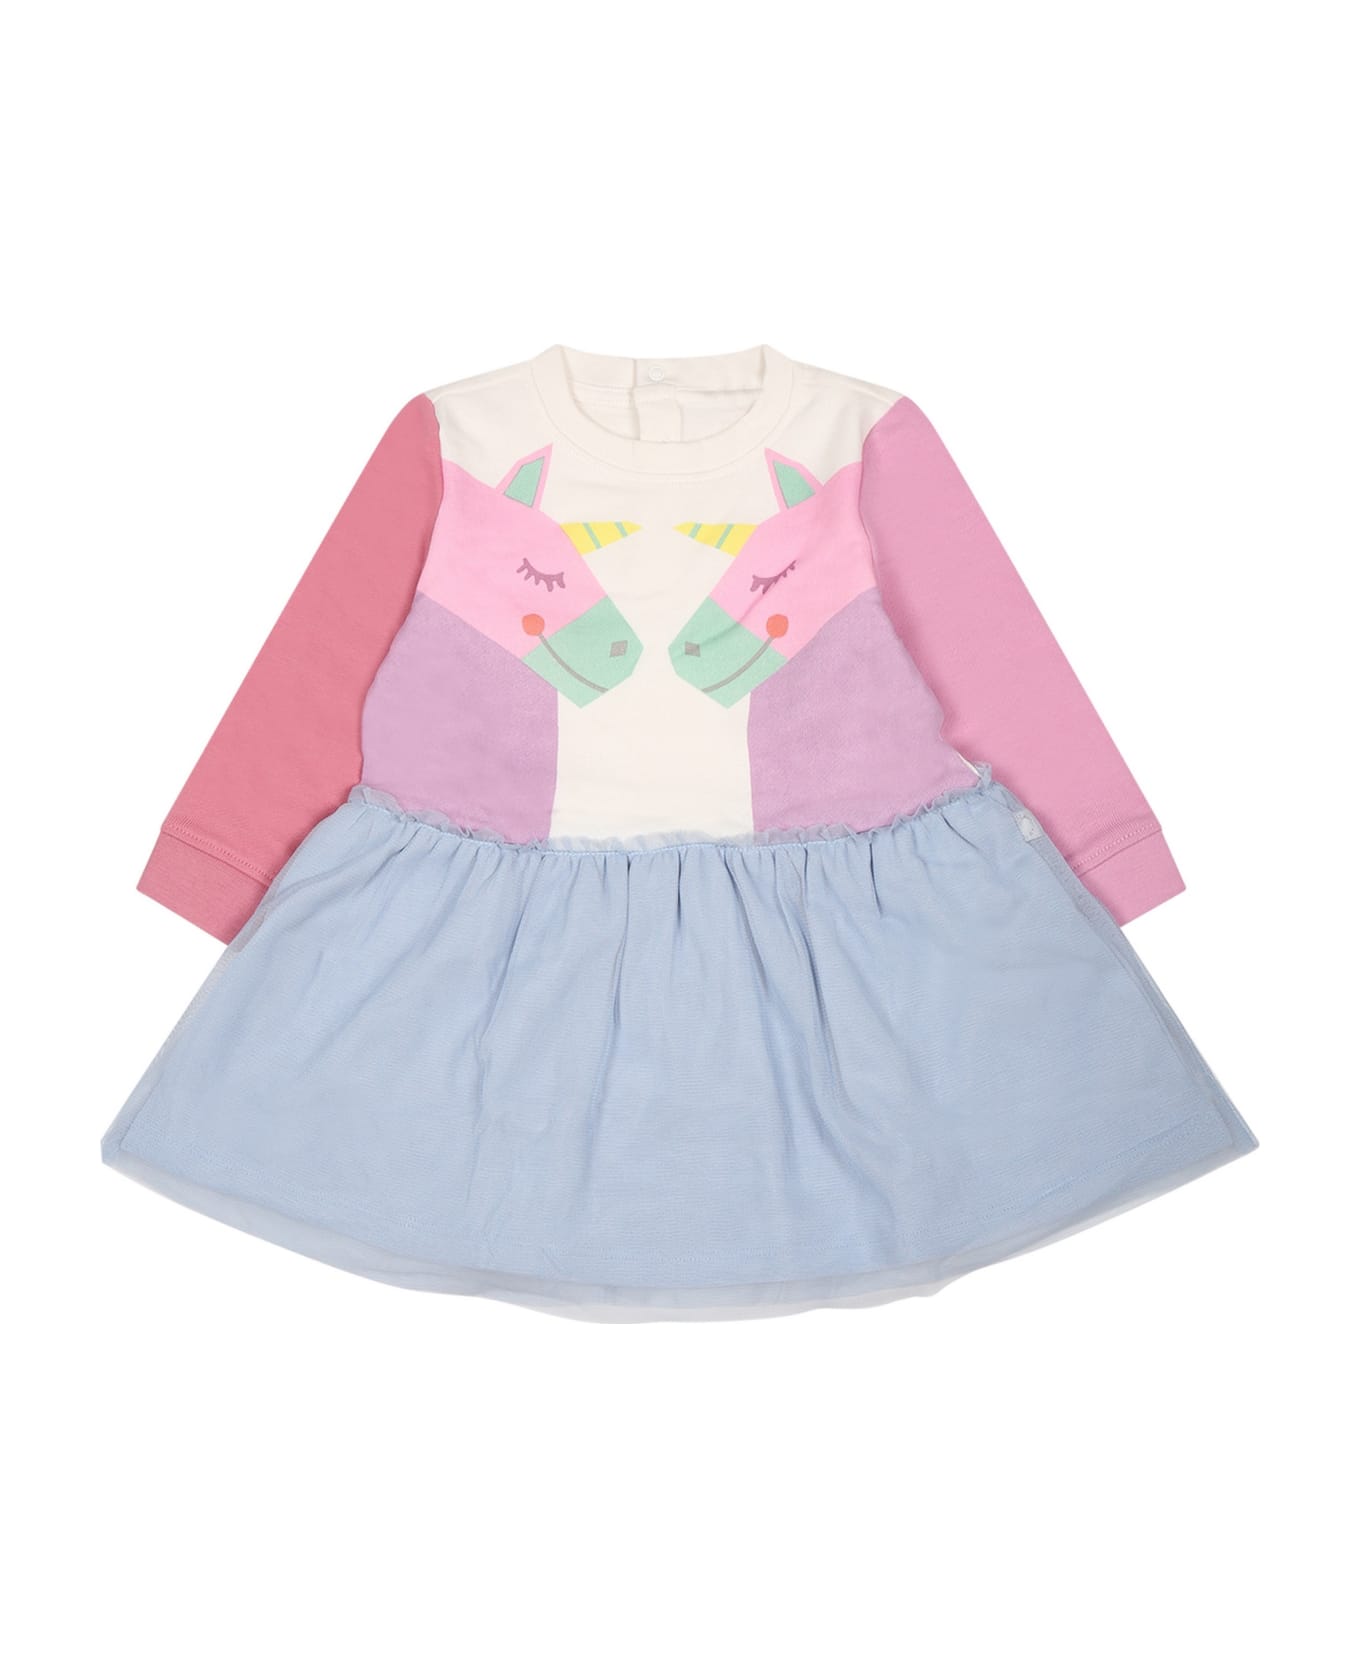 Stella McCartney Kids Multicolor Dress For Baby Girl With Unicorns - Multicolor